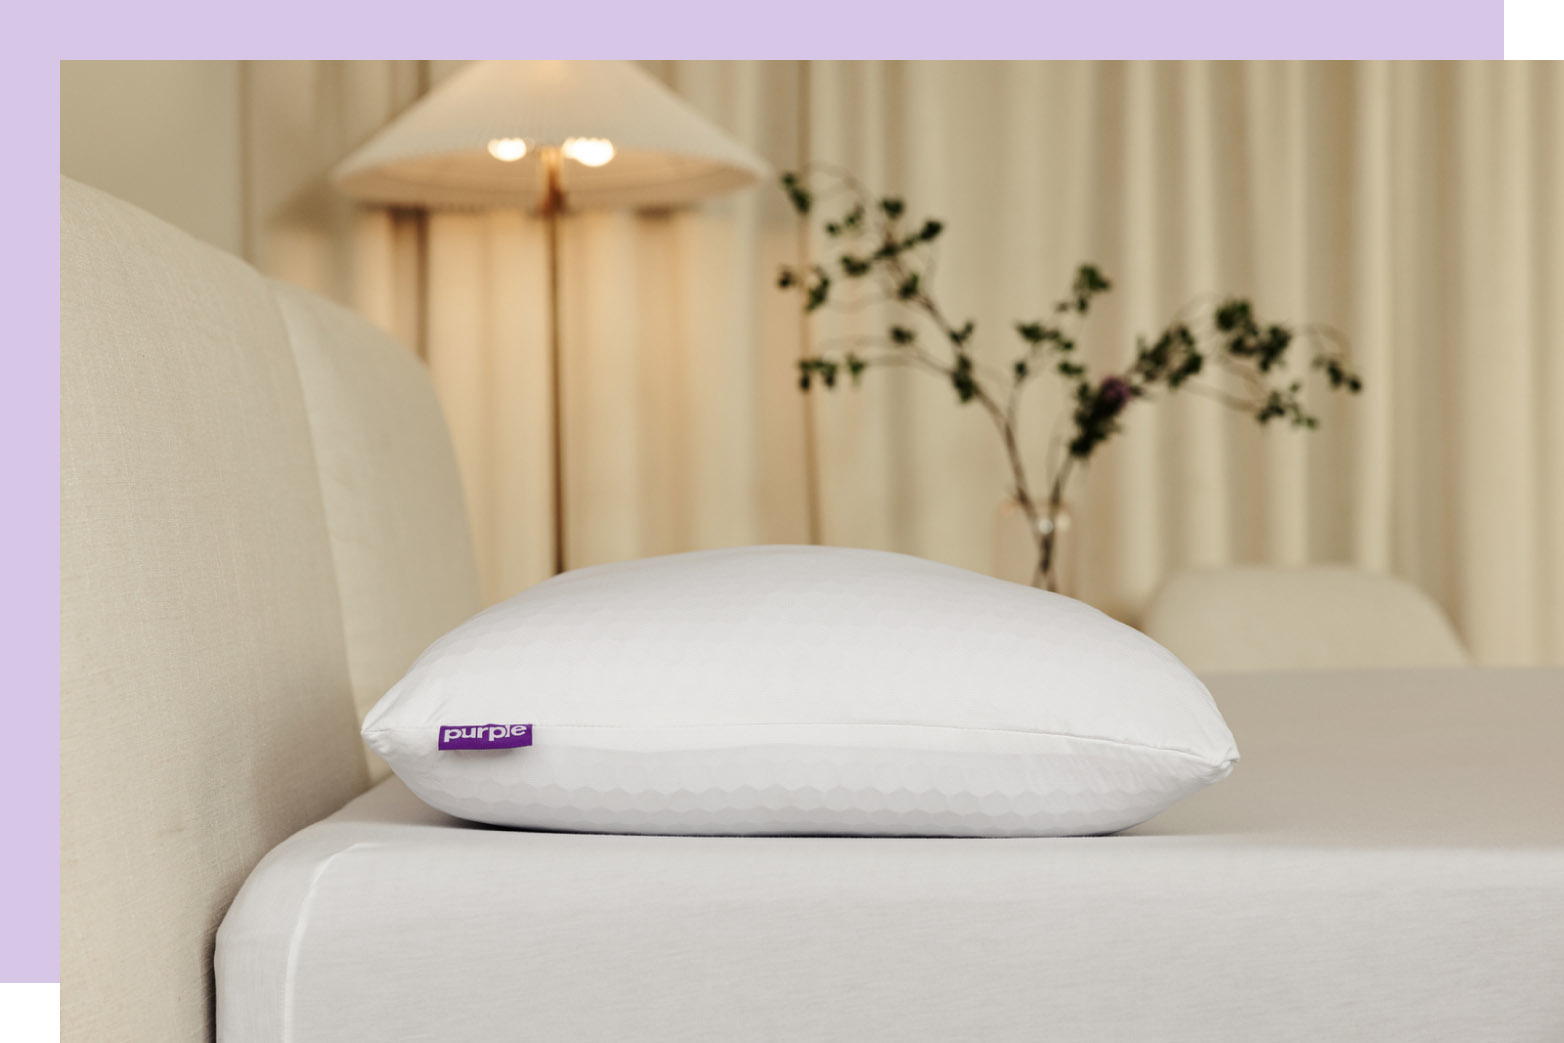 Purple Freeform Pillow for back sleepers.